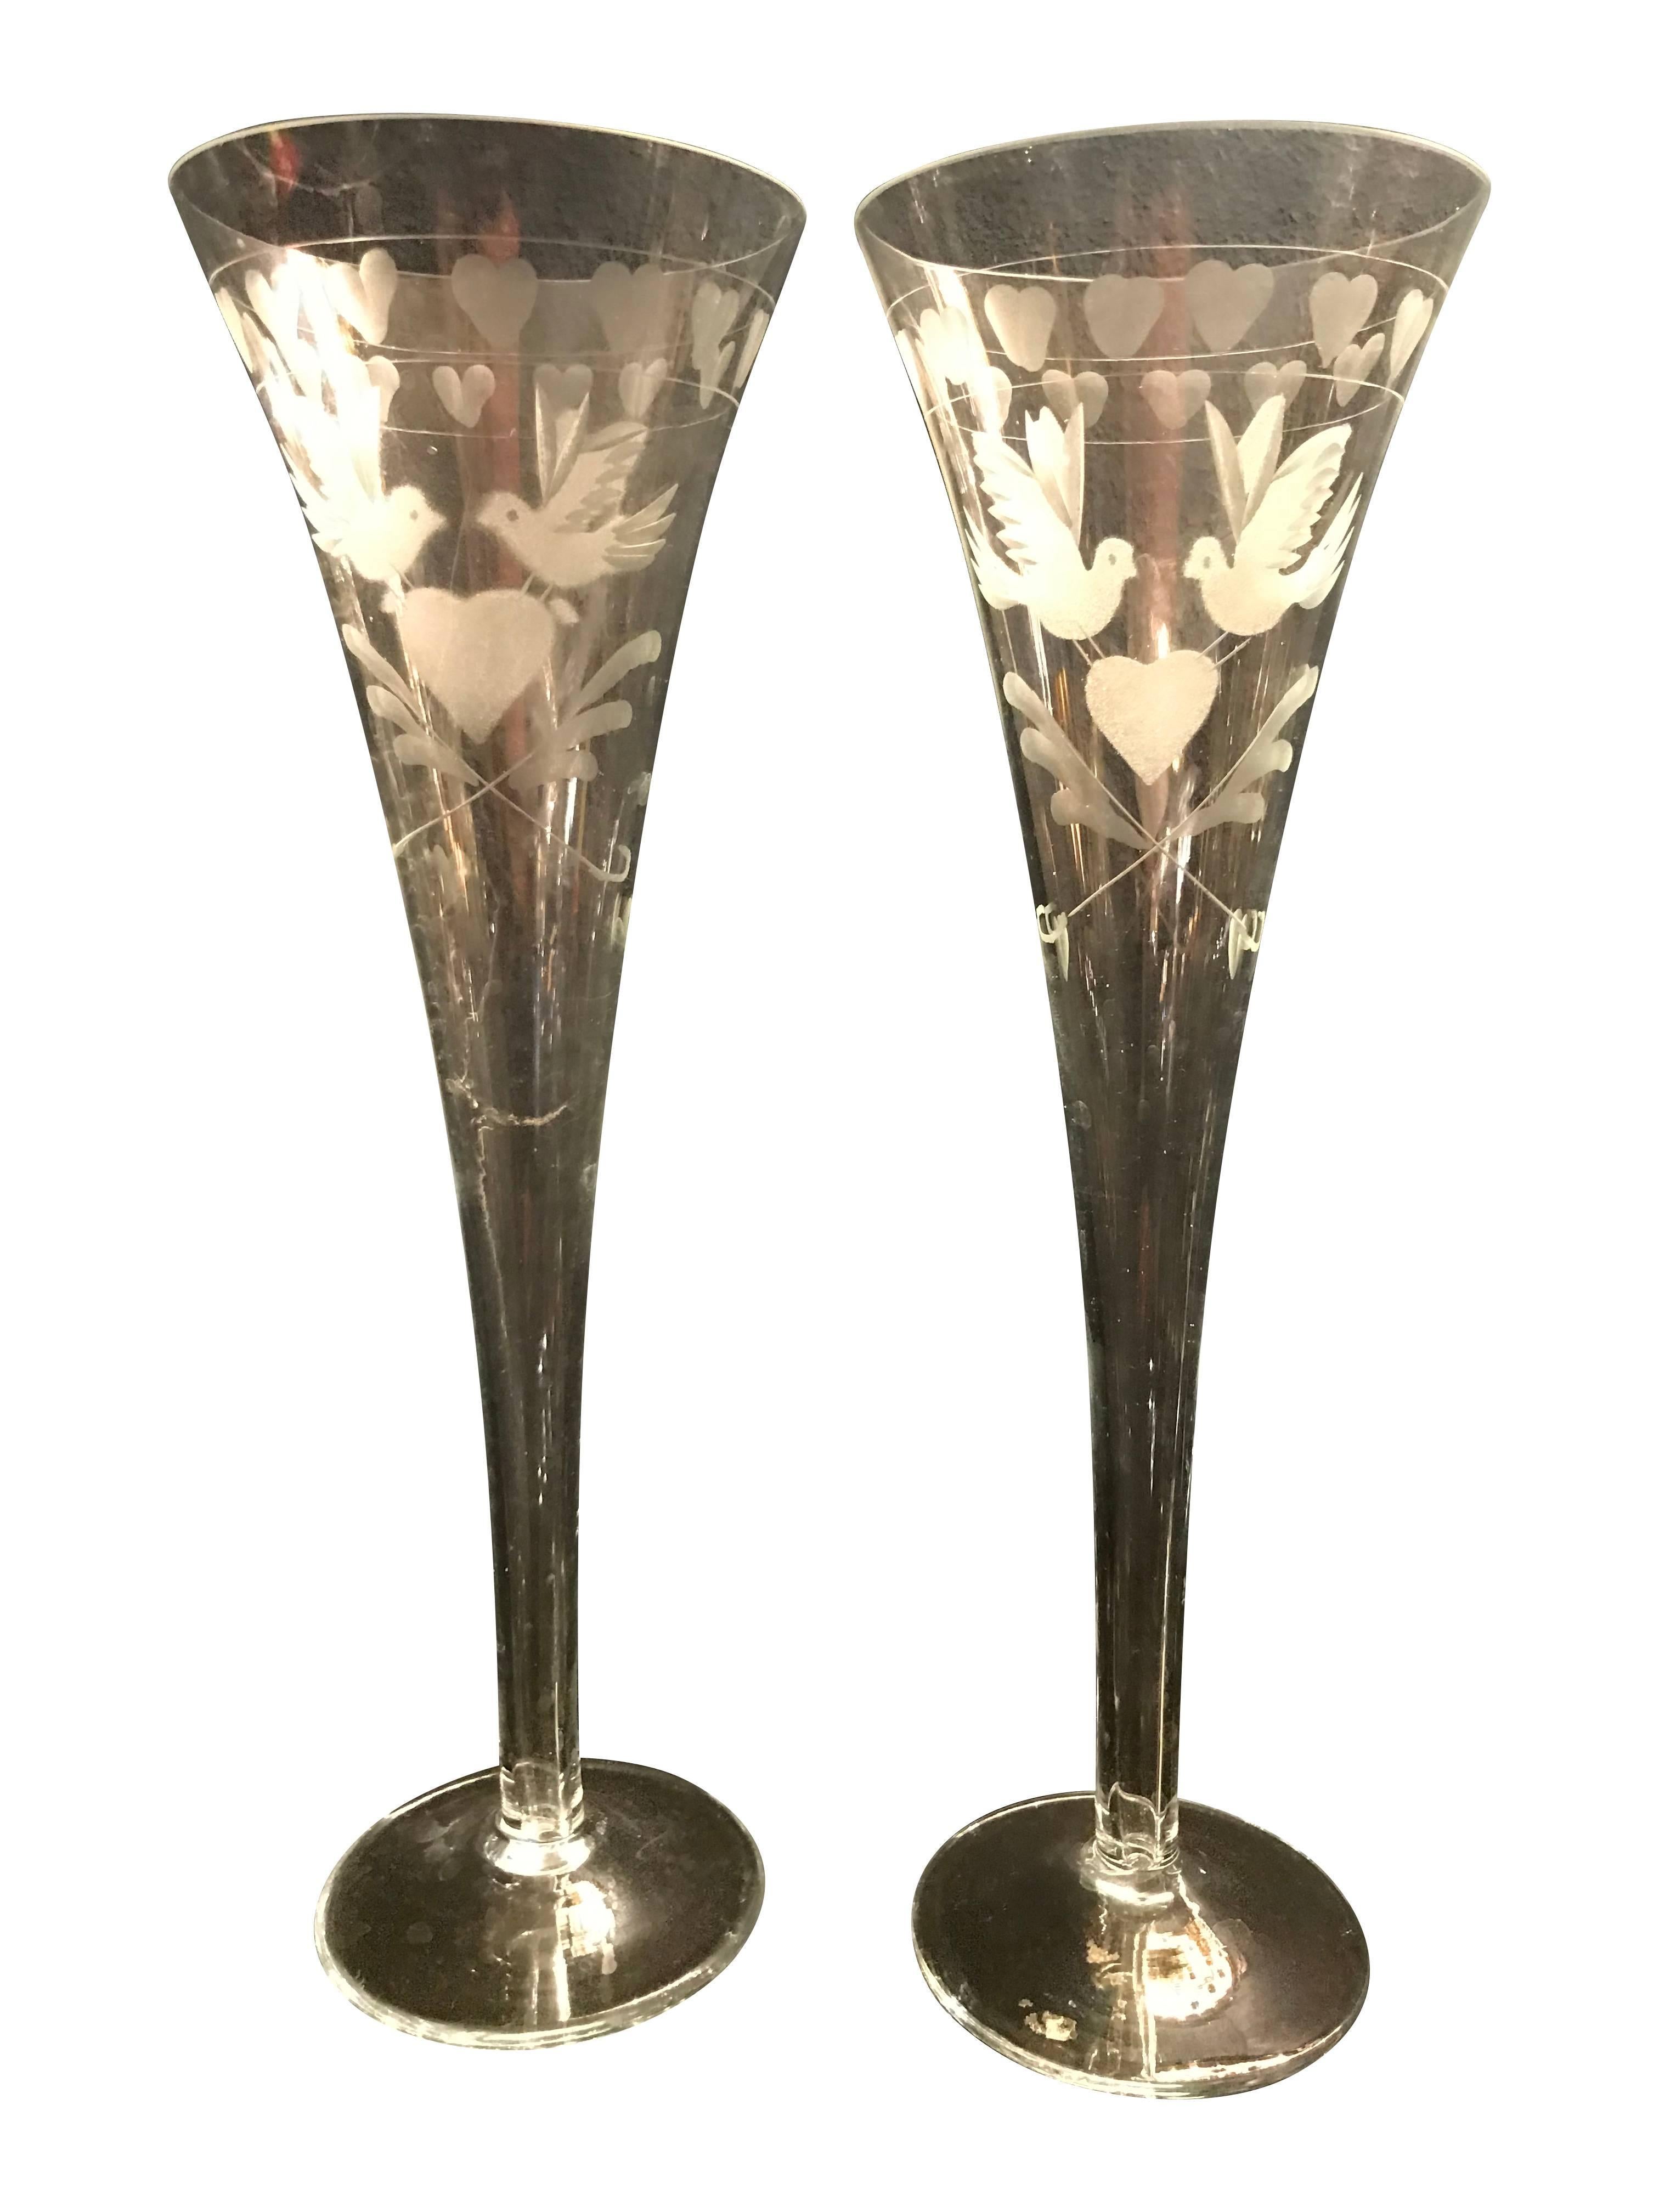 Beautiful, vintage, engraved French champagne flutes. Each engraved with 2 doves holding a love heart, also with love hearts around the rim. All in perfect condition and available individually, 11 available. Perfect for wedding, engagement, or